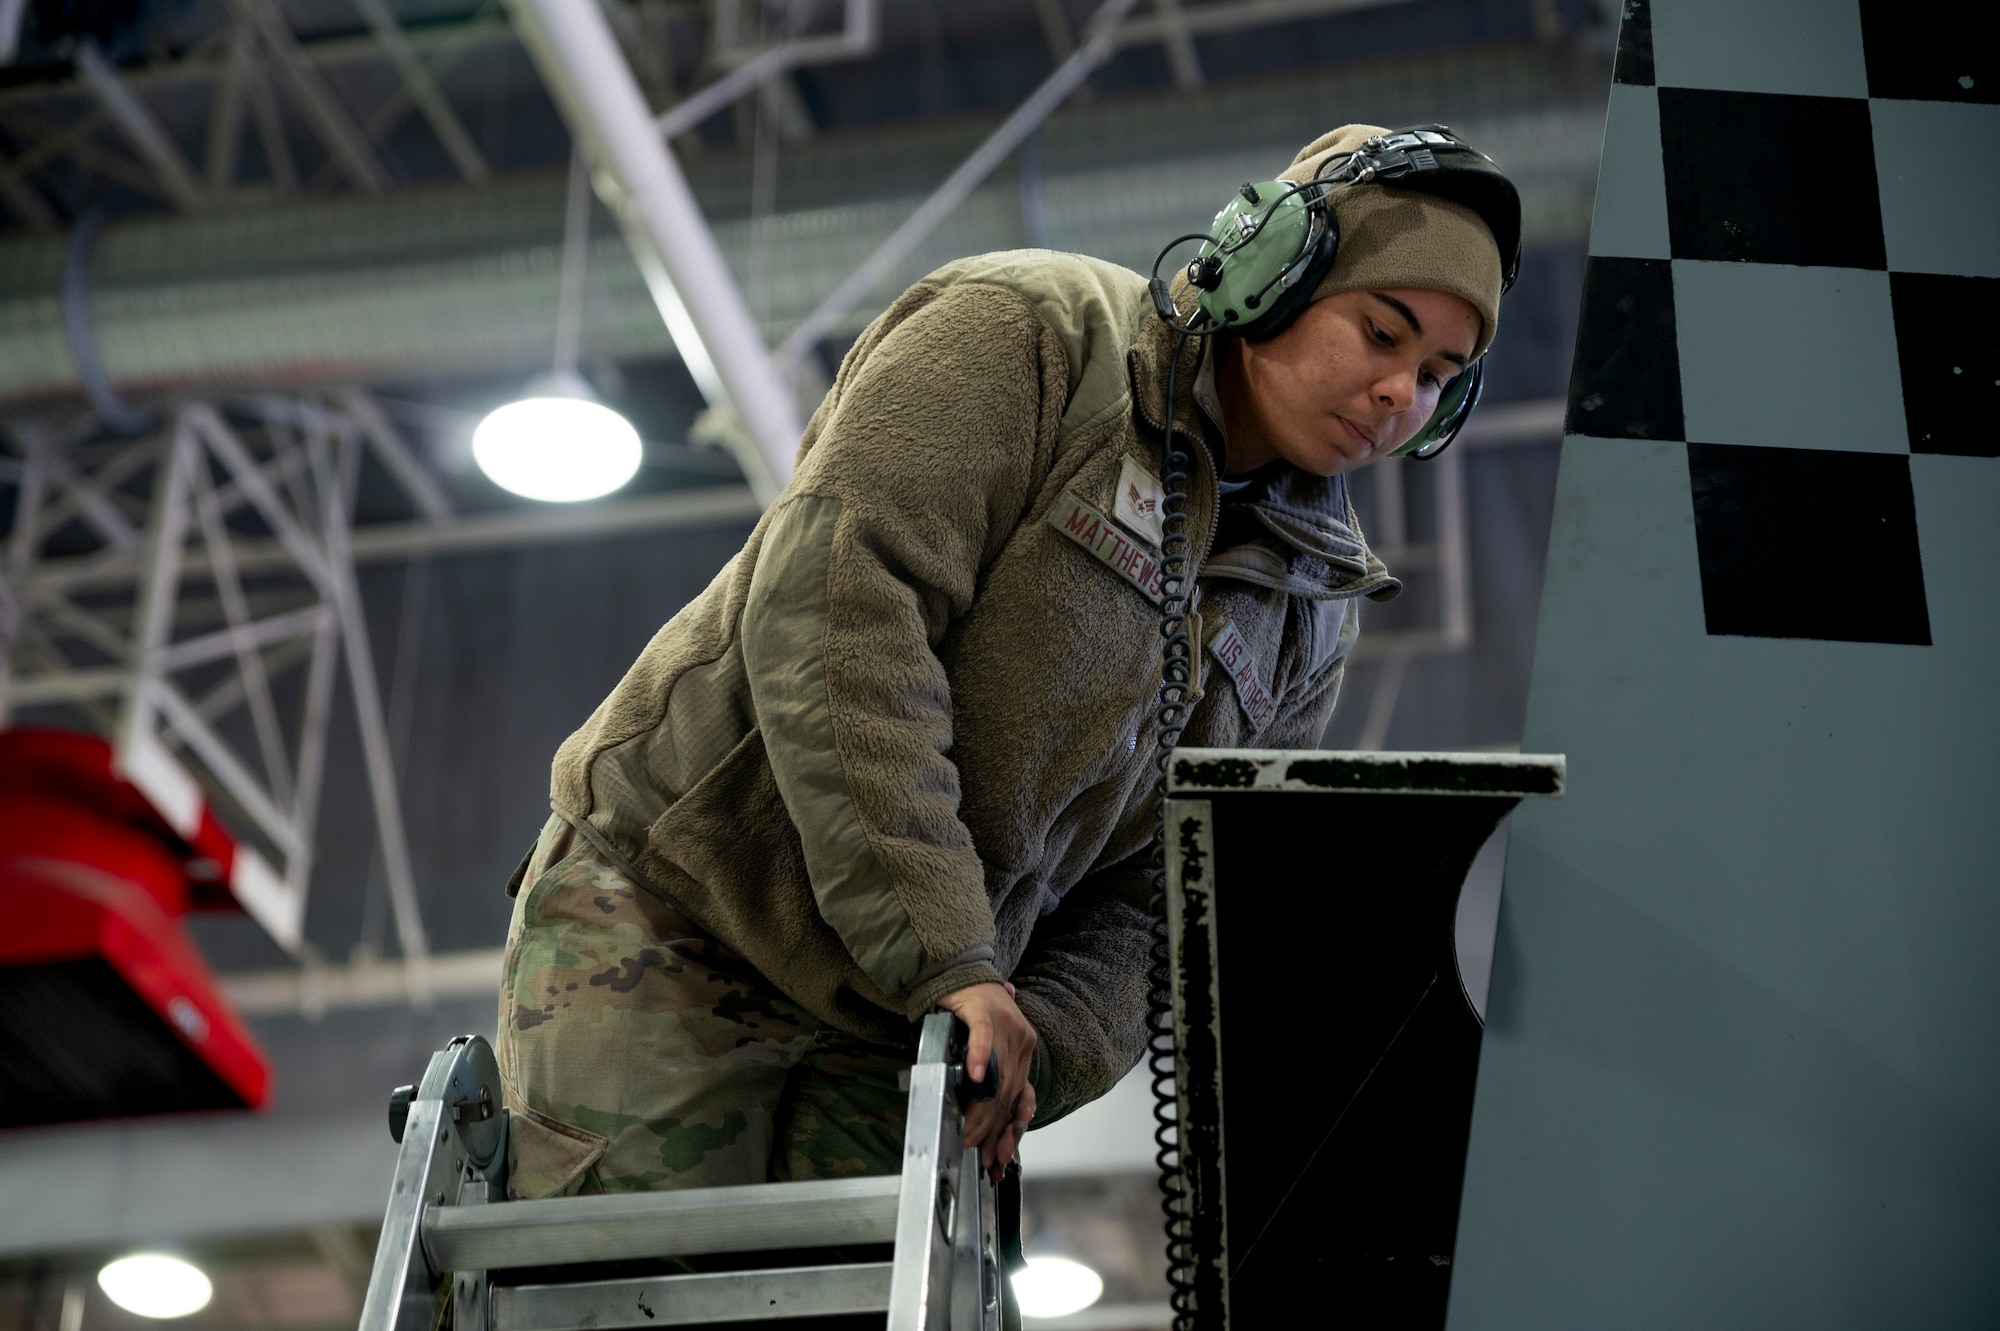 U.S. Air Force Senior Airman Zewdi Matthews, 25th Fighter Generation Squadron (FGS) crew chief, inspects the tail of an A-10C Thunderbolt II during a phase inspection at Osan Air Base, Republic of Korea, Jan. 12, 2023.